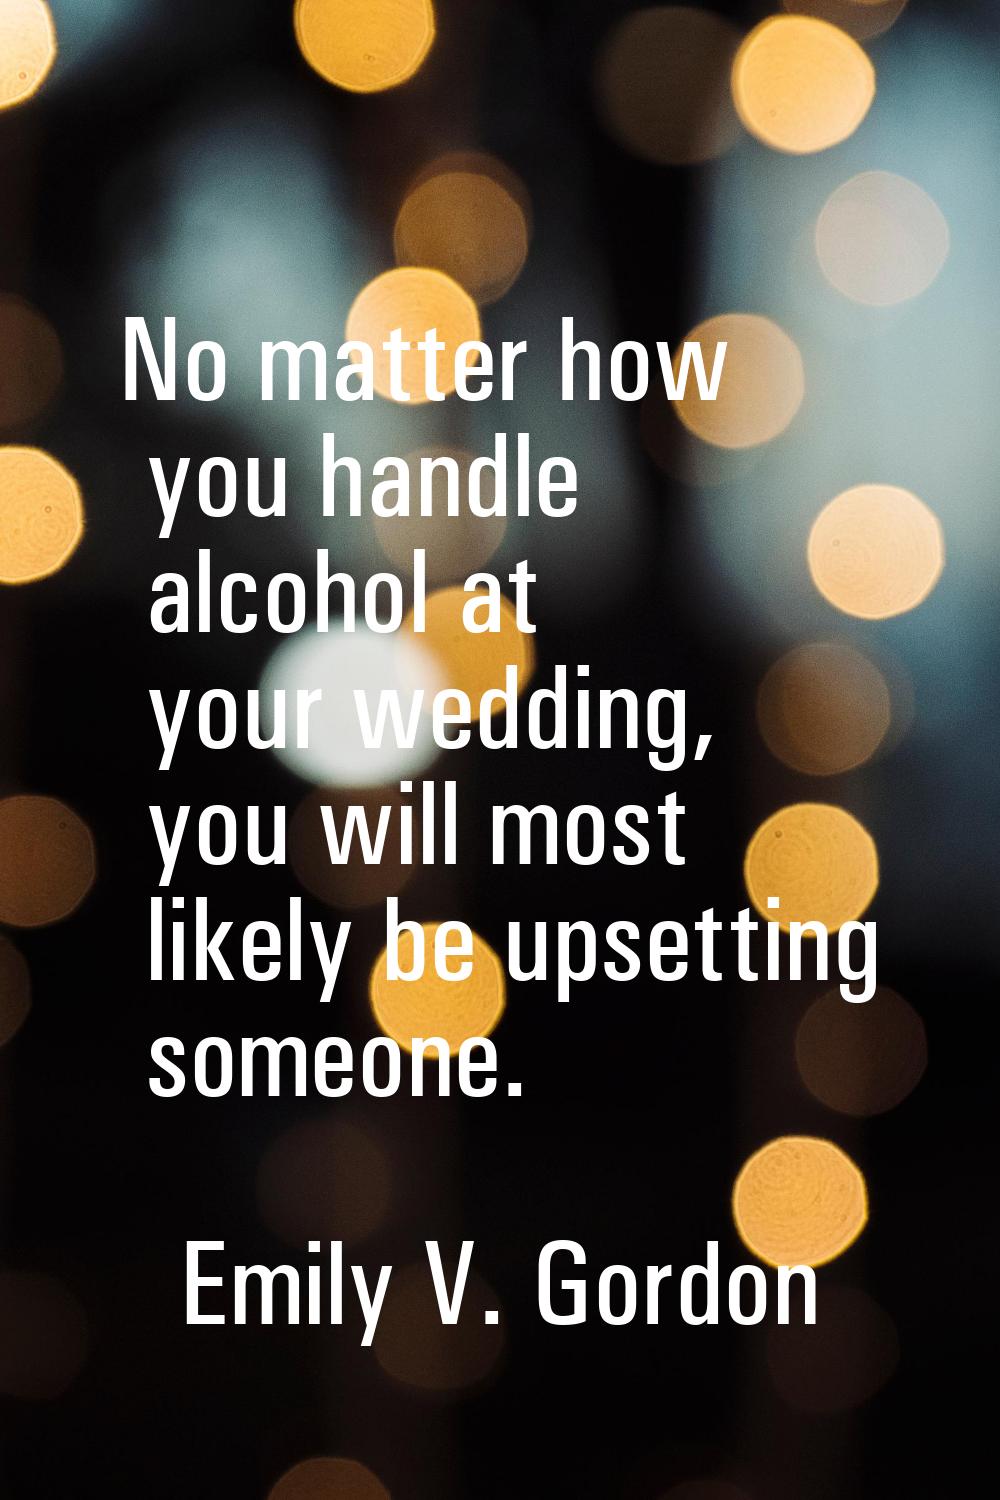 No matter how you handle alcohol at your wedding, you will most likely be upsetting someone.